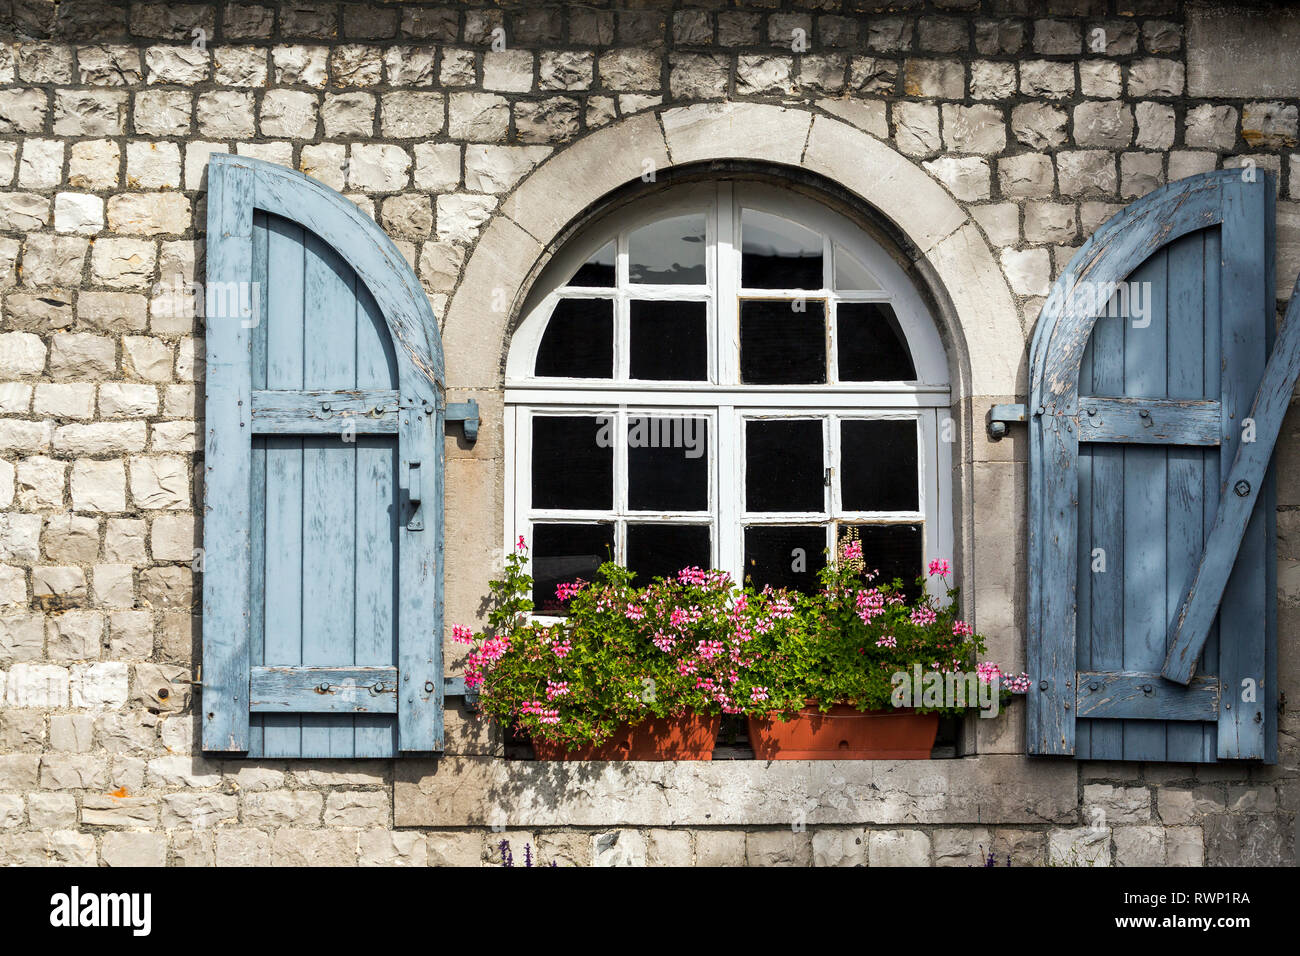 Close-up of wooden shutters on an arched window on a stone building with flower boxes; Namur, Belgium Stock Photo